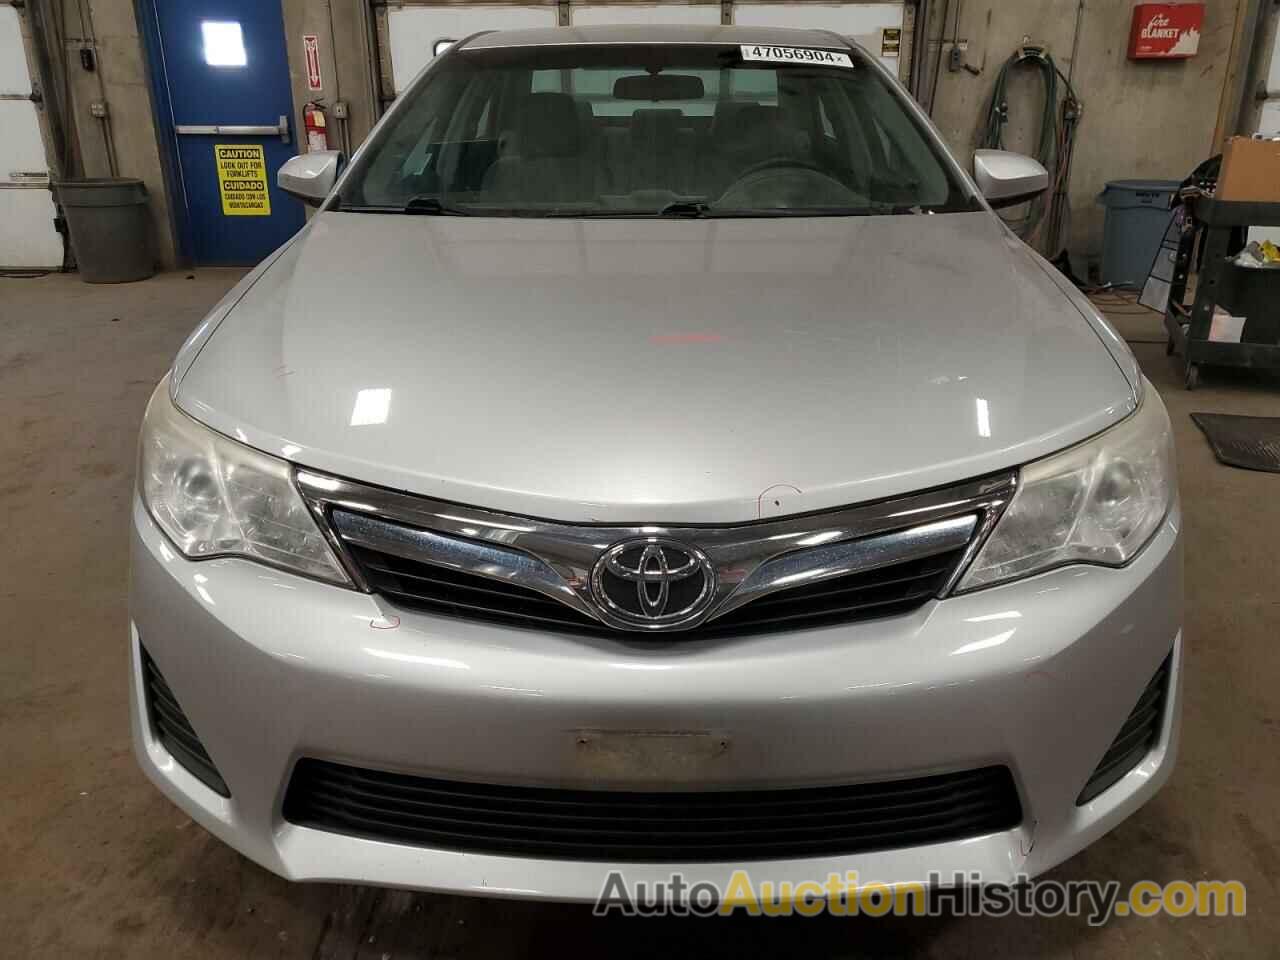 TOYOTA CAMRY BASE, 4T4BF1FK9CR266105